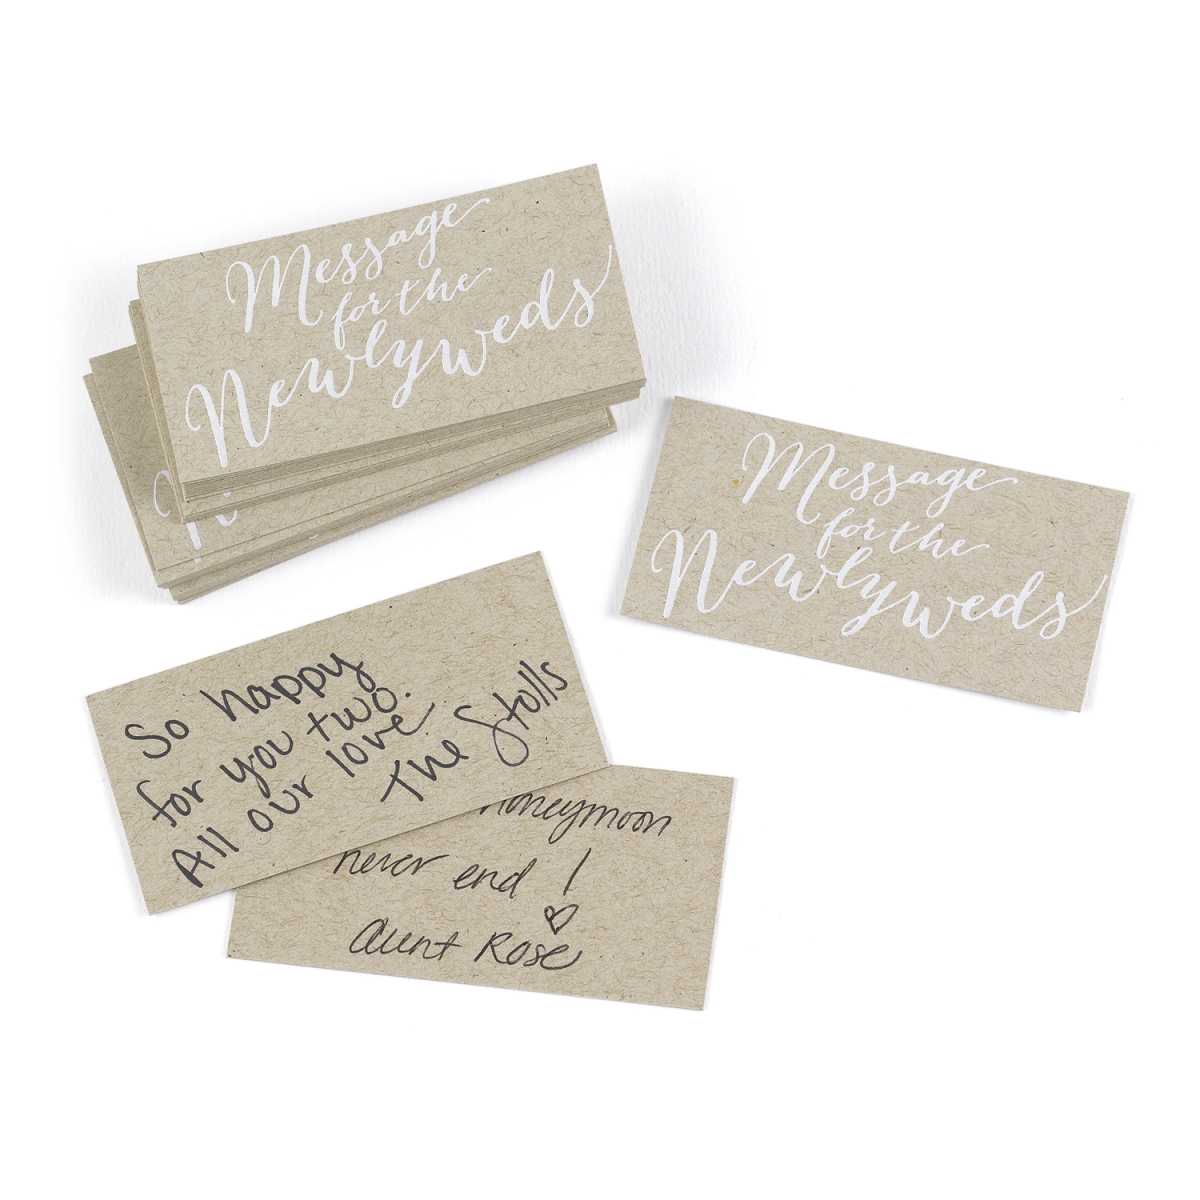 Picture of Hortense B. Hewitt 30952 Message for the Newlyweds Krafty Advice Cards